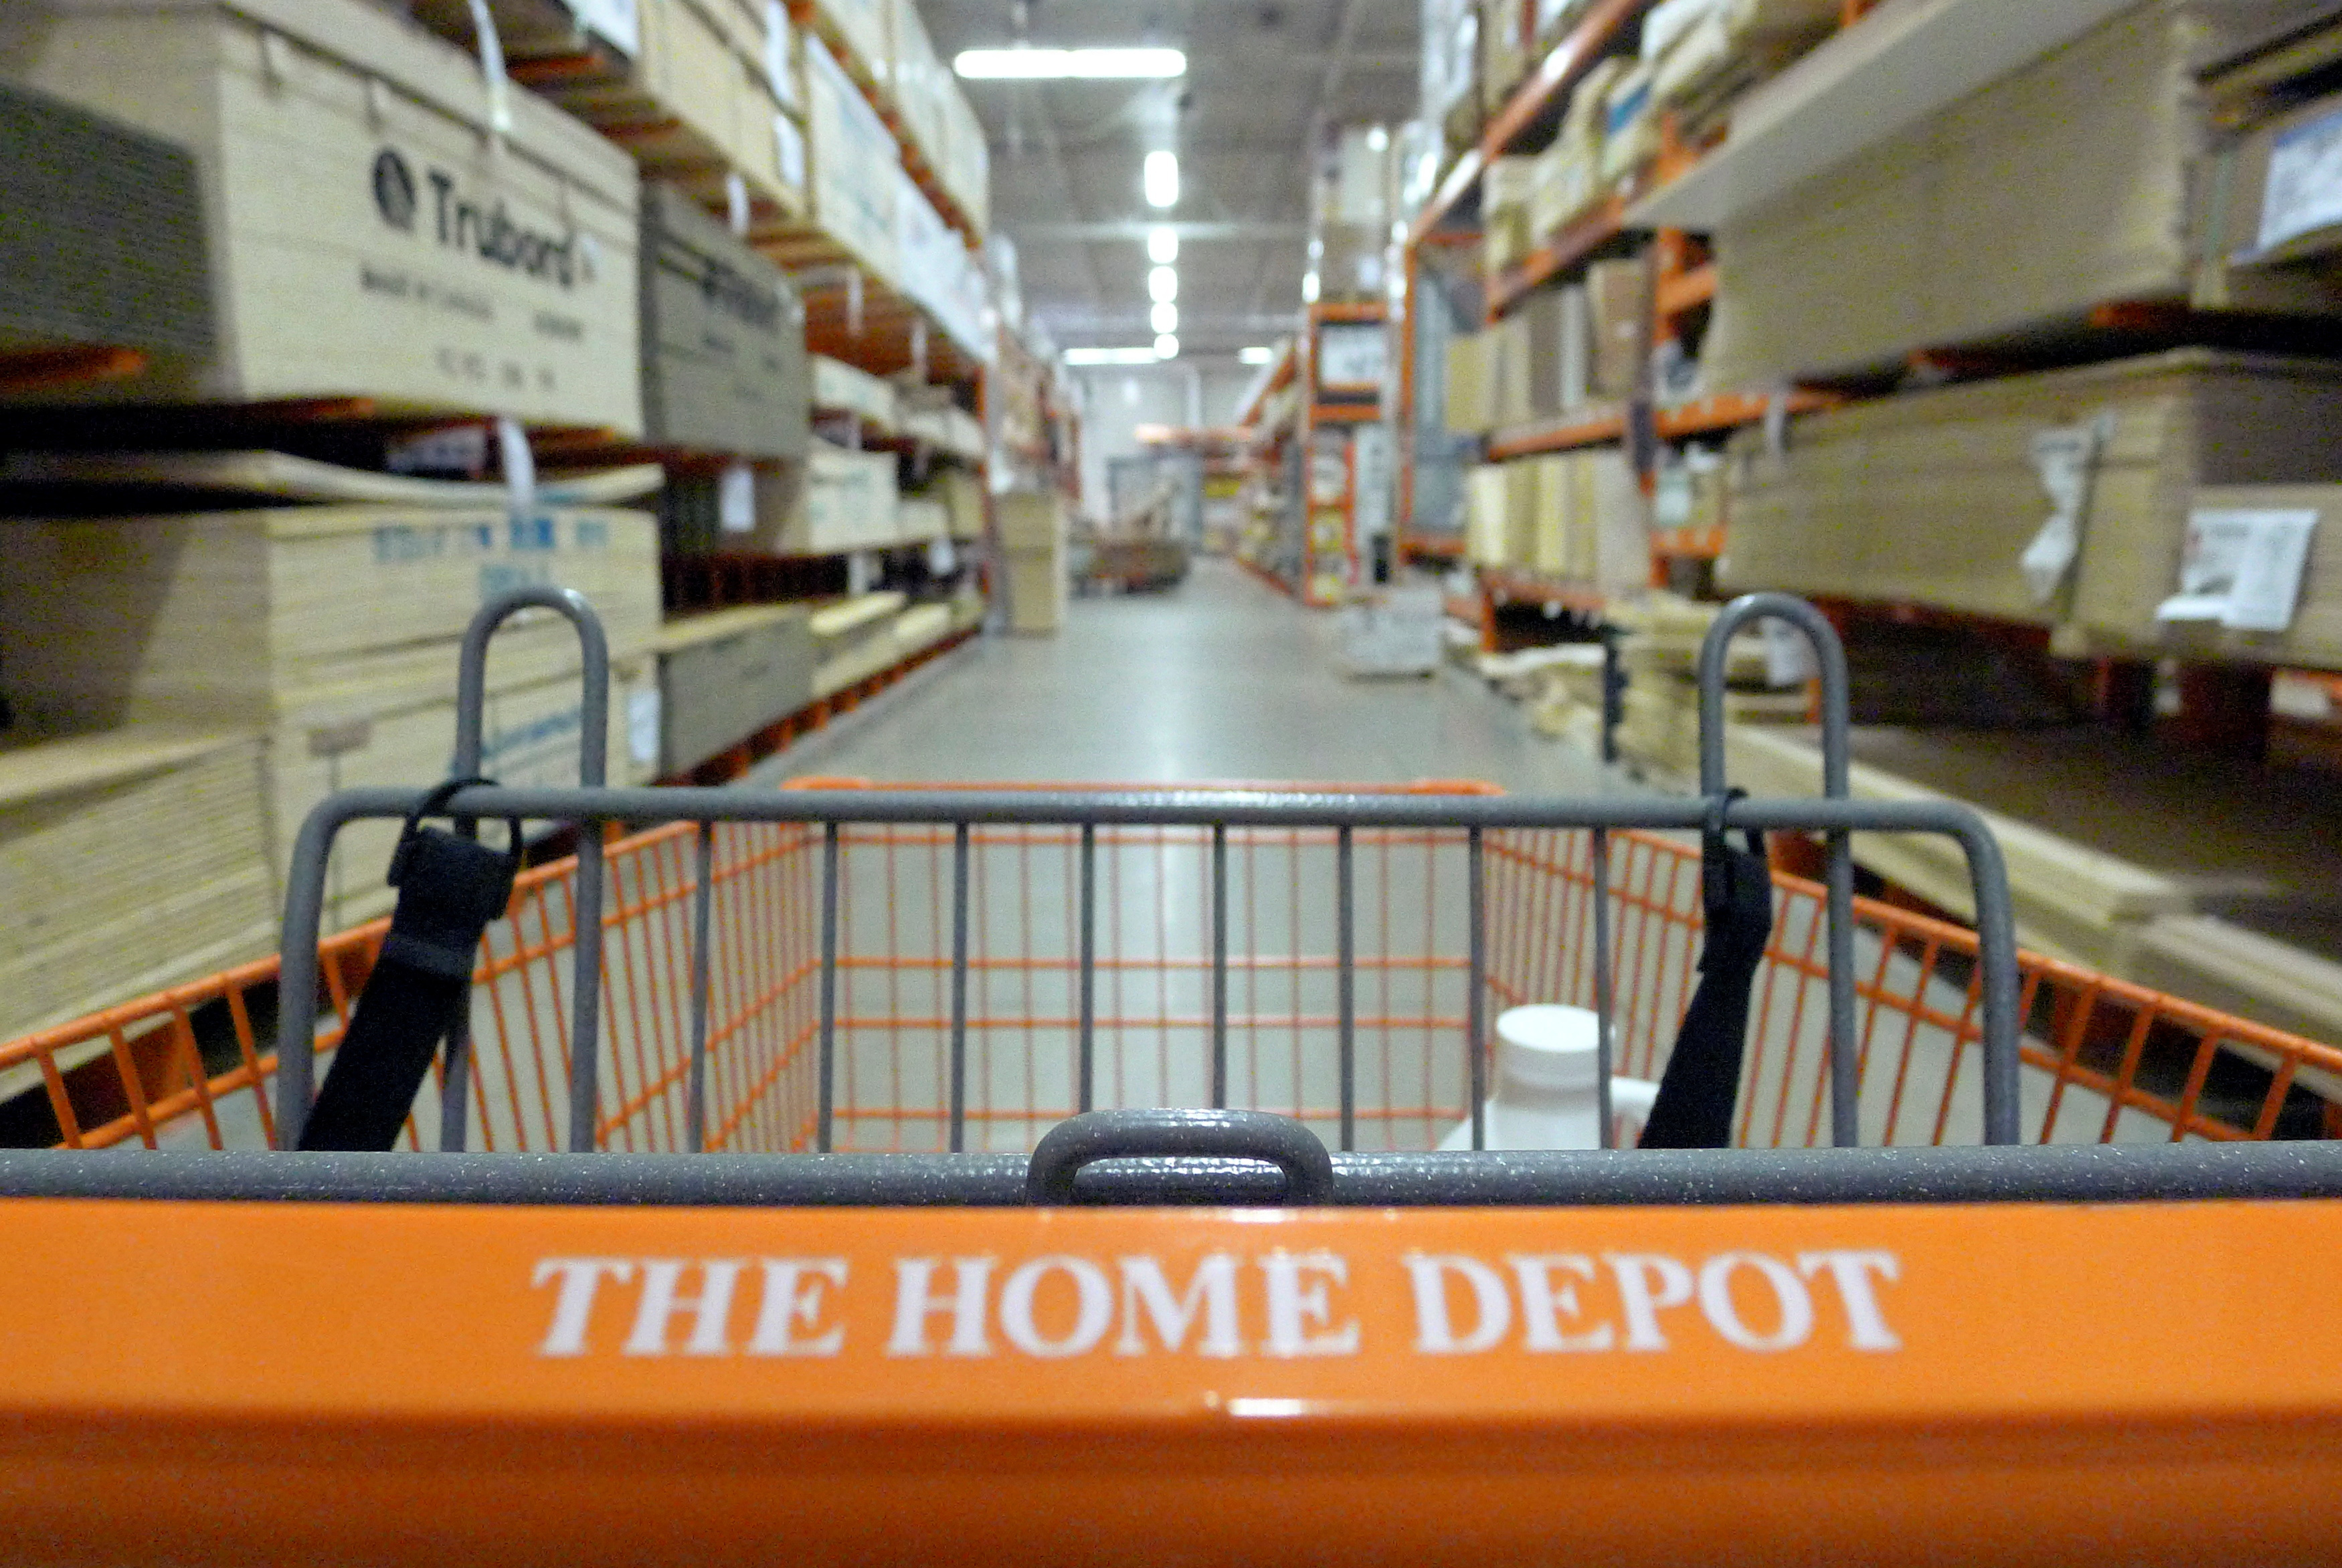 Home Depot rides on smaller remodeling projects to top sales, profit estimates